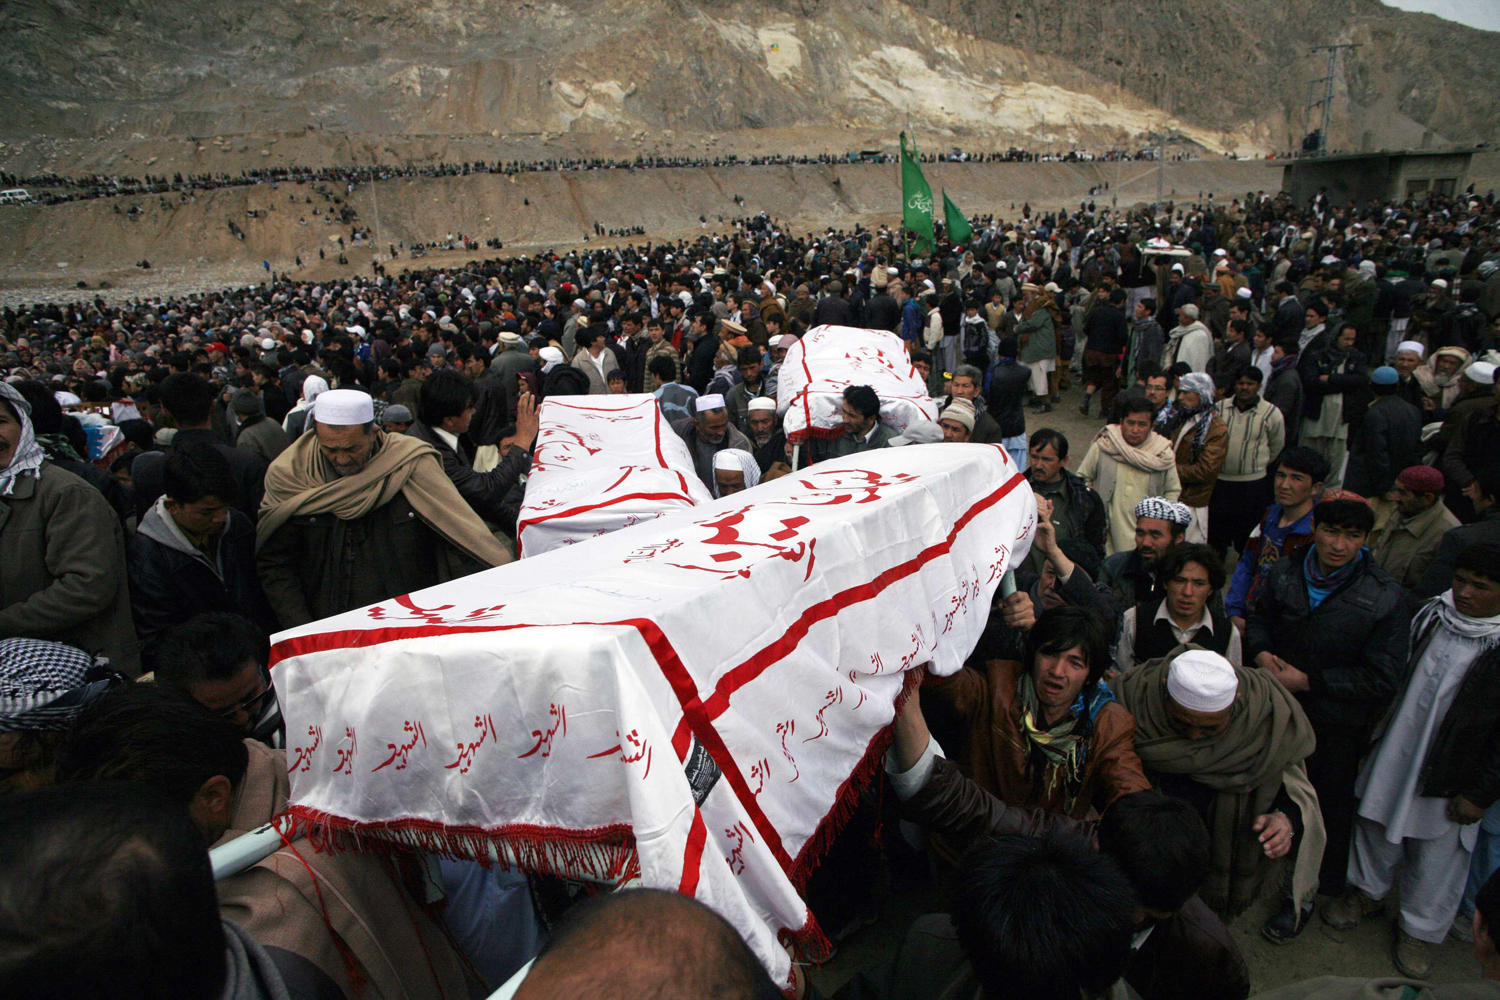 Shi'ite Muslims carry coffins of victims killed in Saturday's bomb attack, during a funeral in Quetta